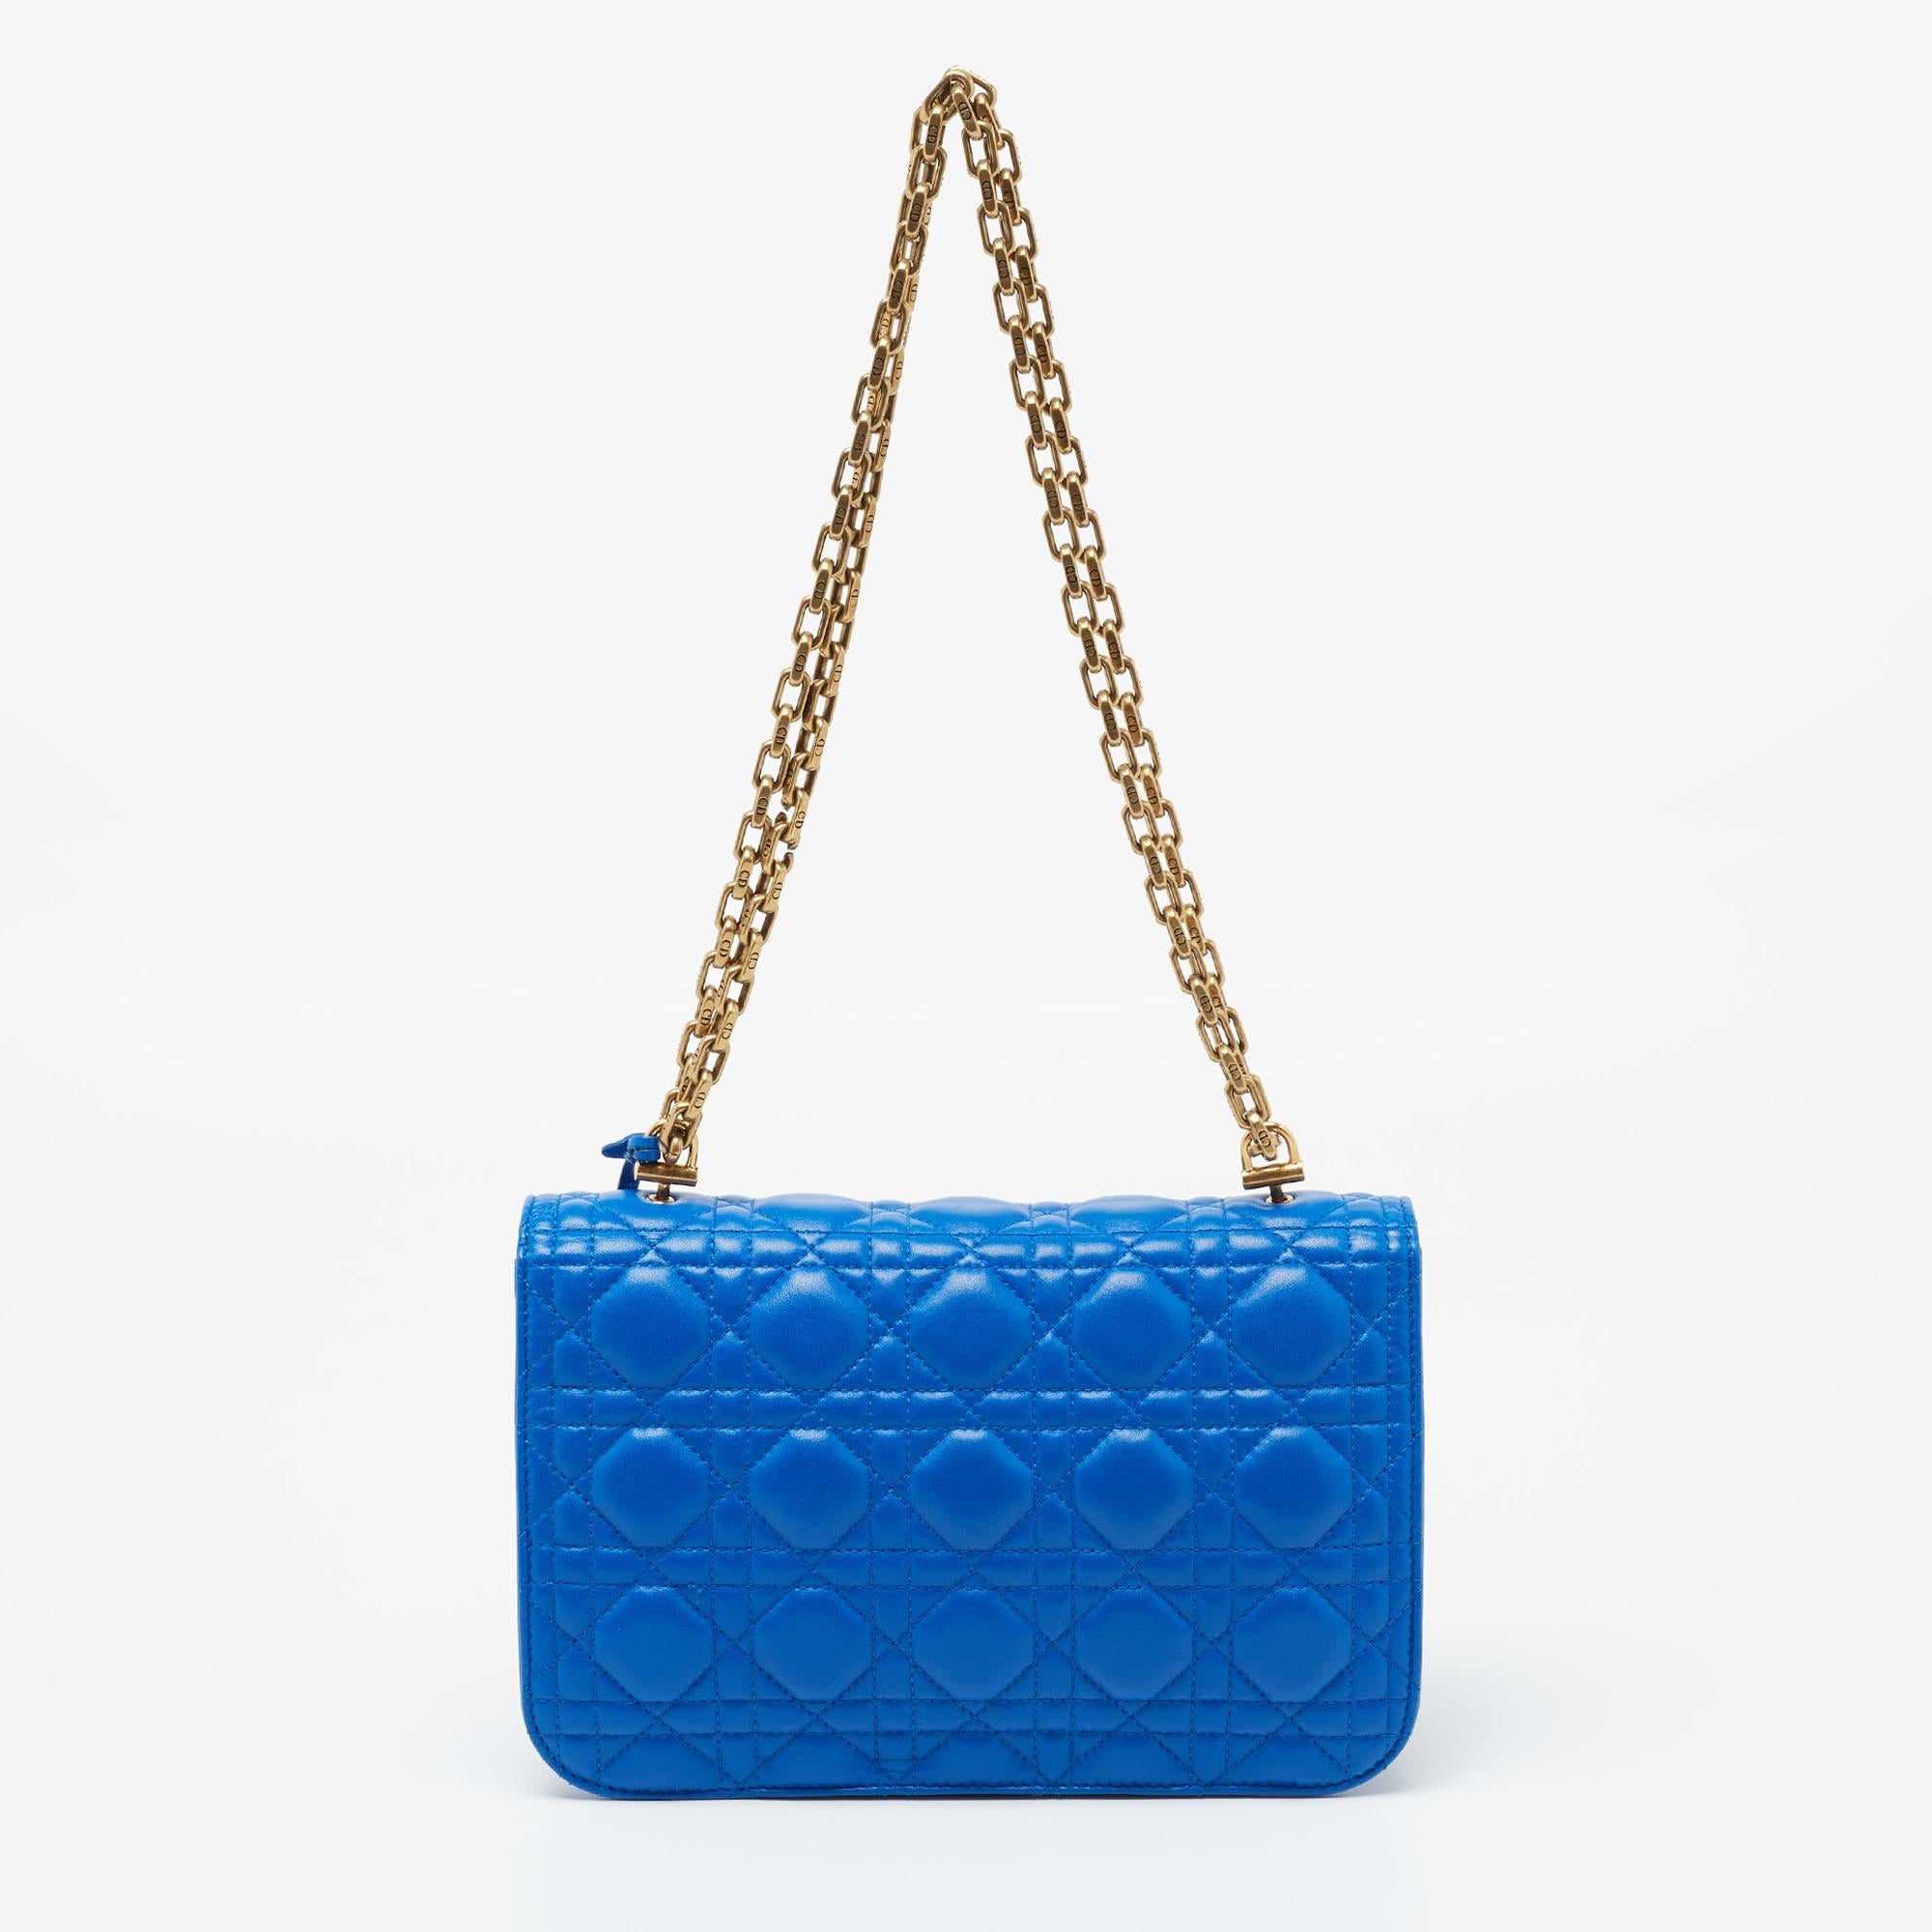 This Dioraddict shoulder bag from the house of Dior is both elegant and fashionable. It is crafted from beautiful blue, Cannage quilted leather, with a gold-tone lock closure perched on the front. It has a suede-lined interior and a slender chain